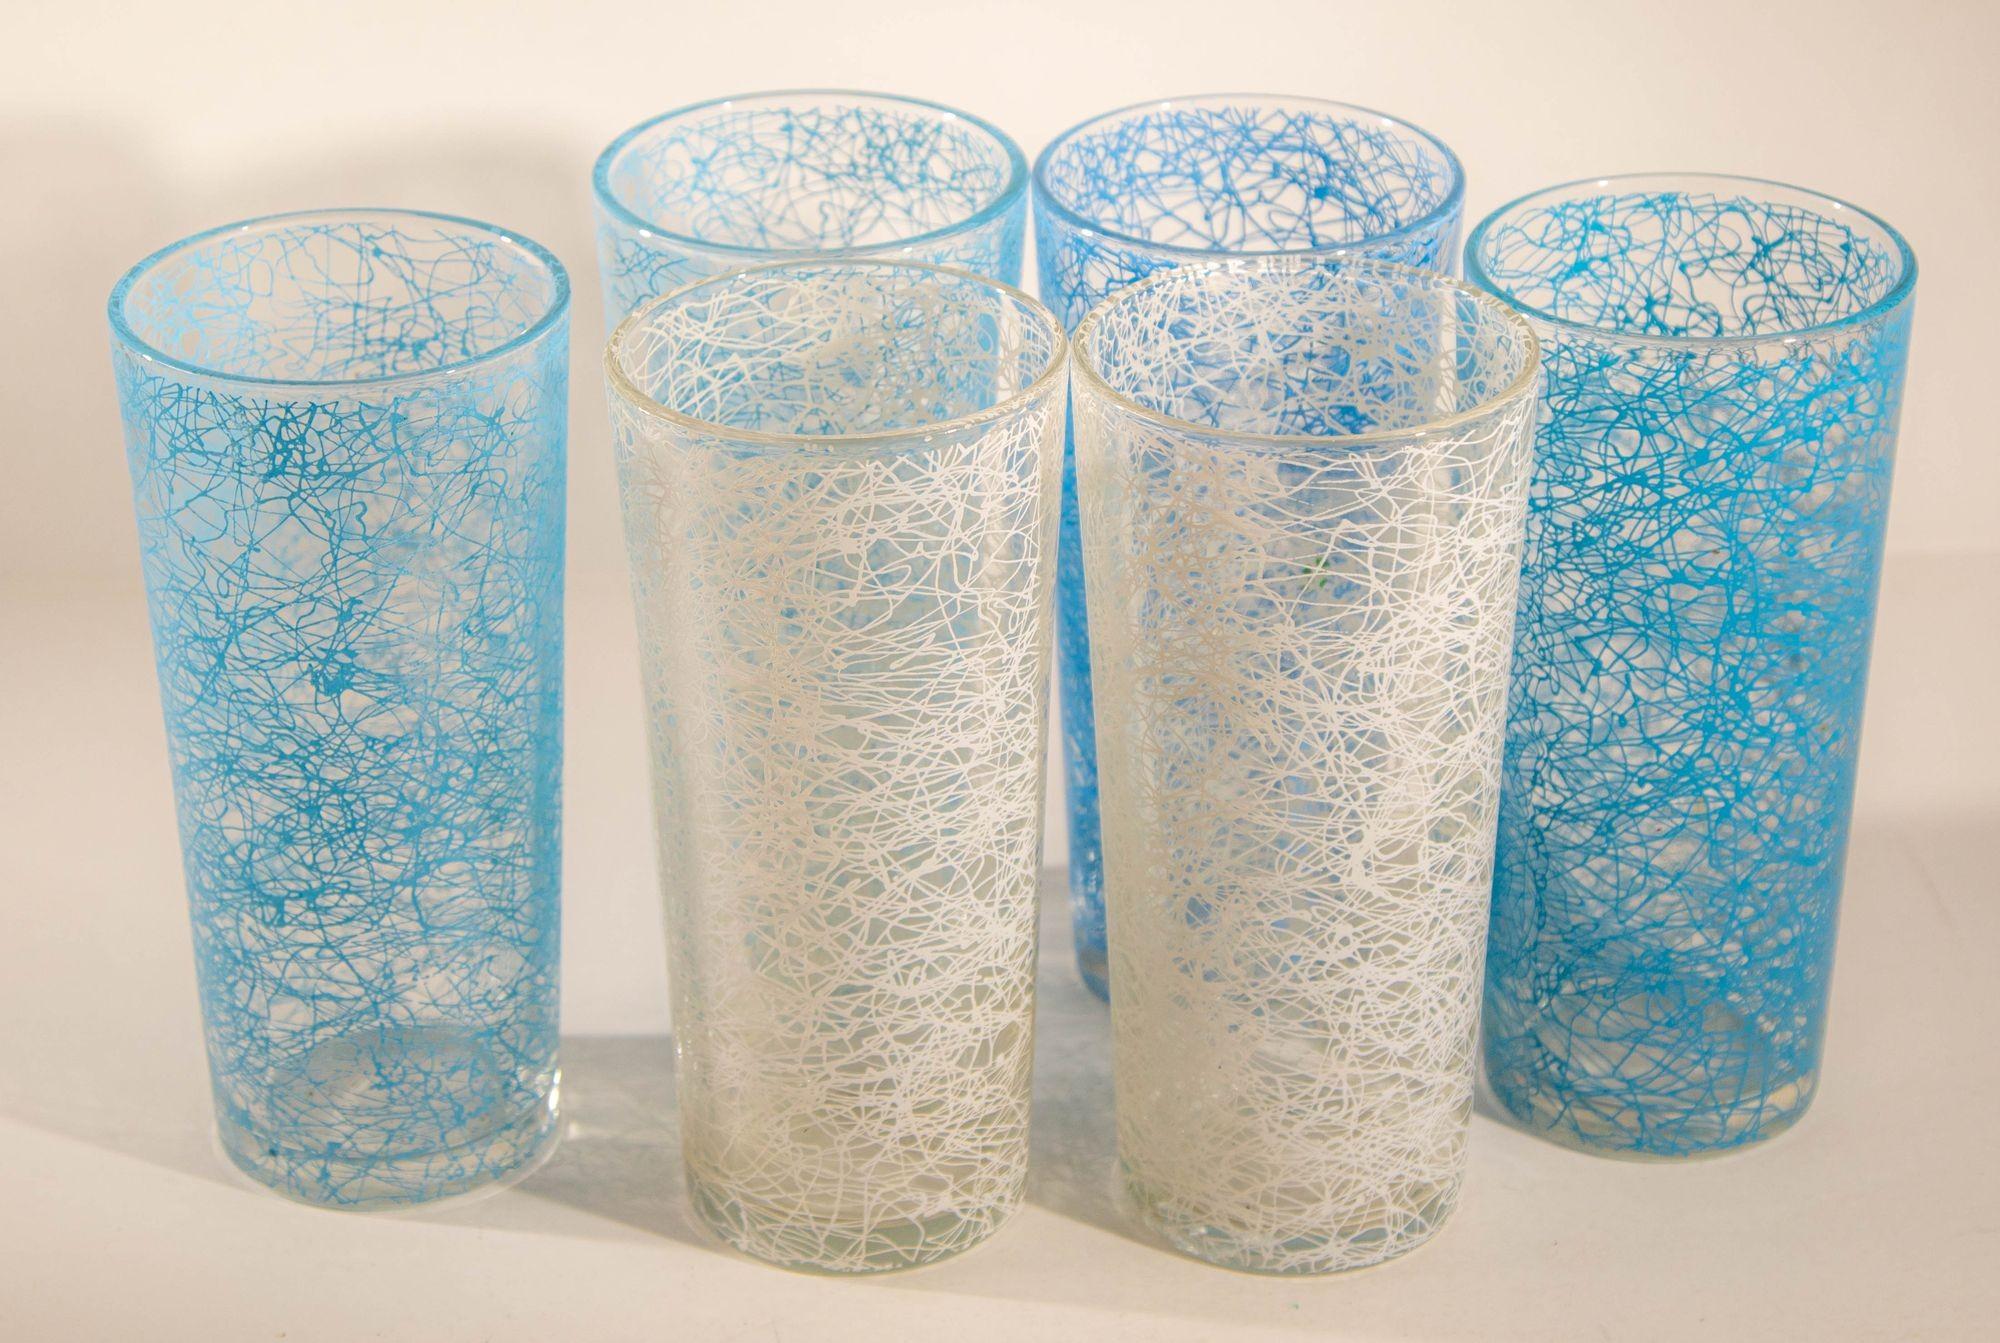 Vintage Collectible Retro Highball Spaghetti Tumblers Set of 6 Blue and White For Sale 5